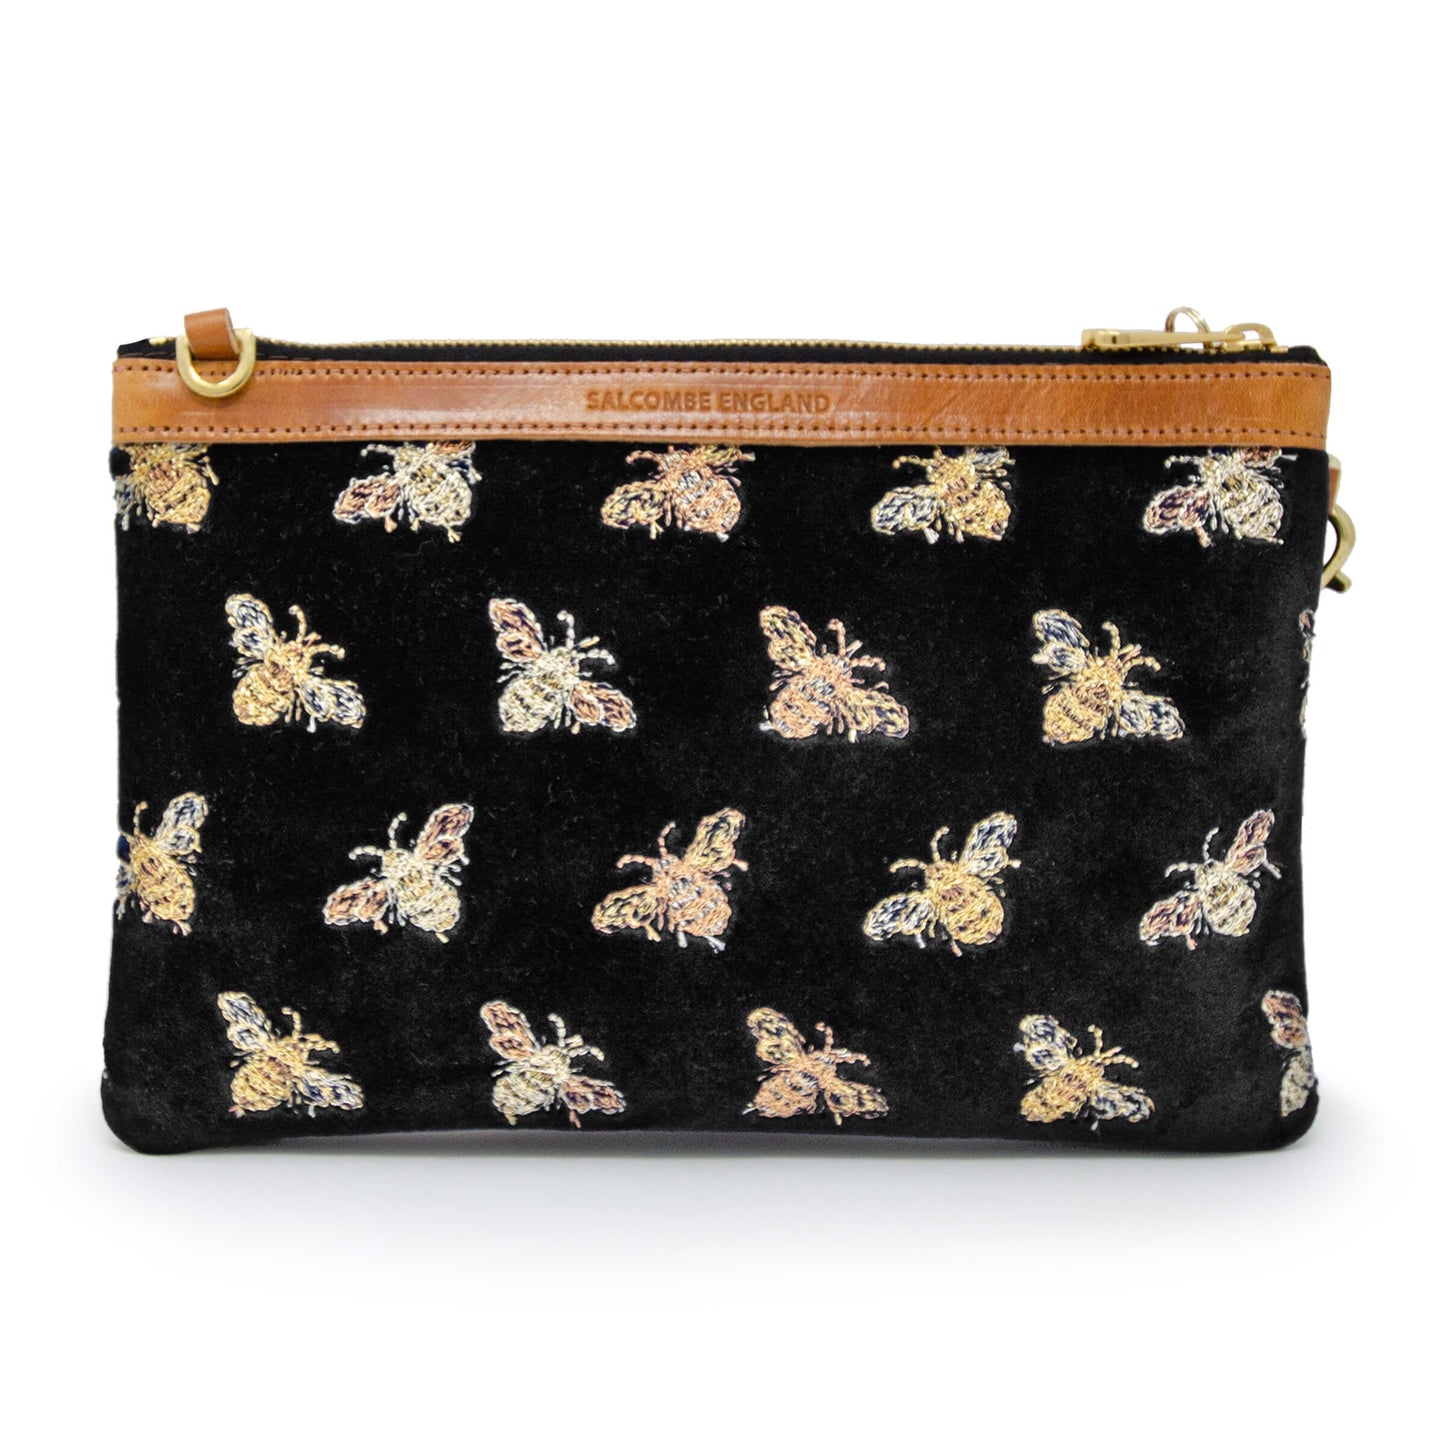 Diana 2 in 1 Clutch - Classic Bees on Black Velvet - Will Bees Bespoke